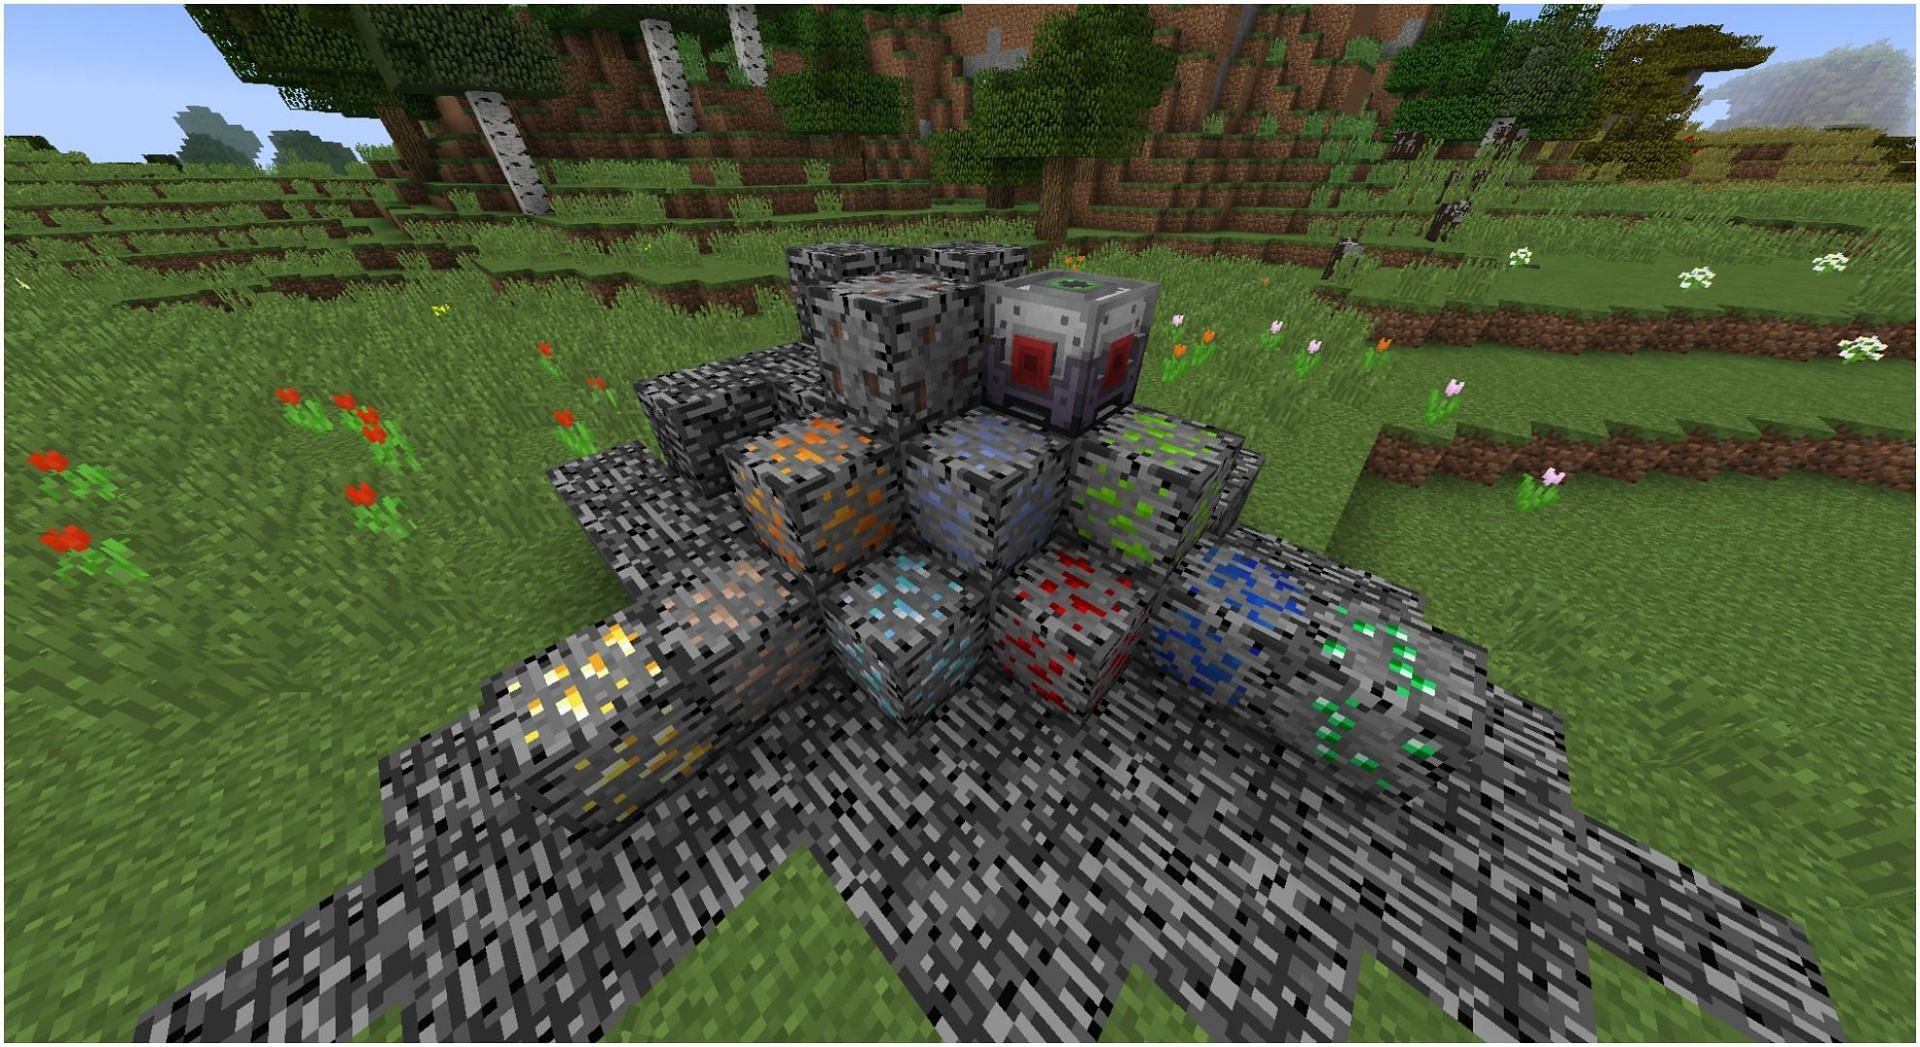 Ores are an important part of Minecraft (Image via Minecraft)